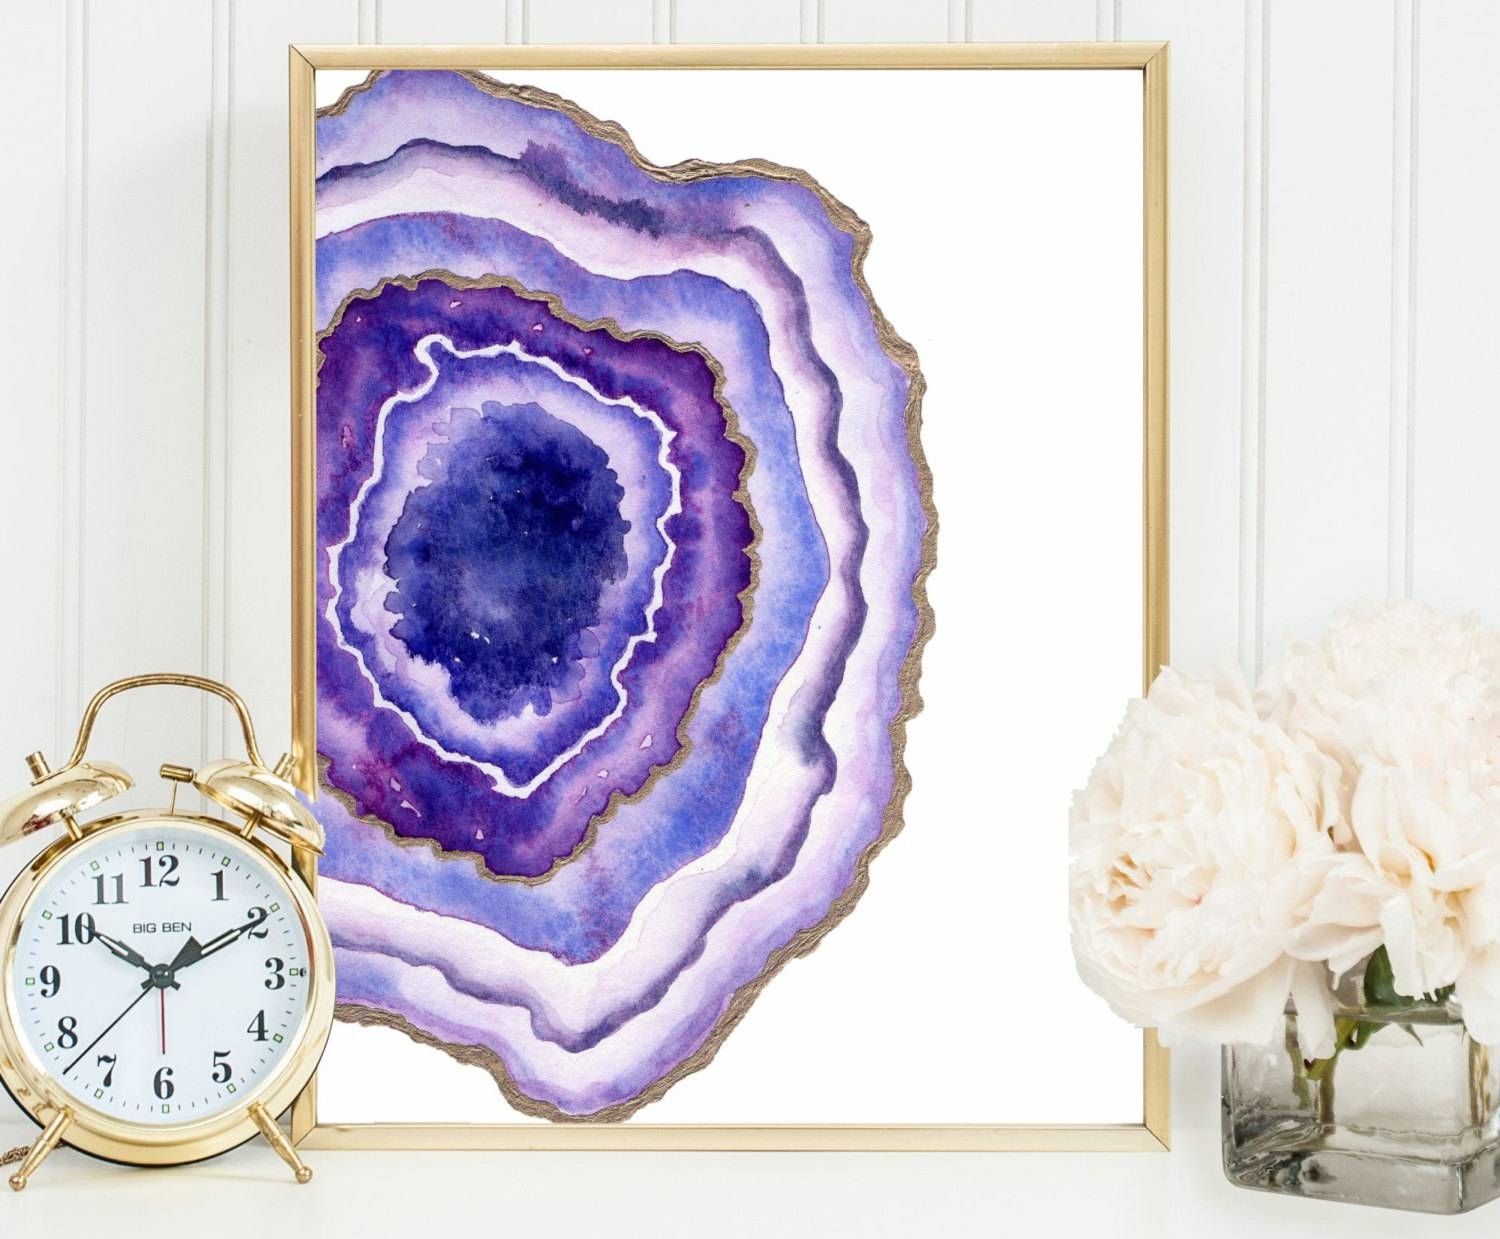 Geode Agate Slice Art Geode Print Gemstone Wall Decor For Most Recently Released Gemstone Wall Art (Gallery 5 of 31)